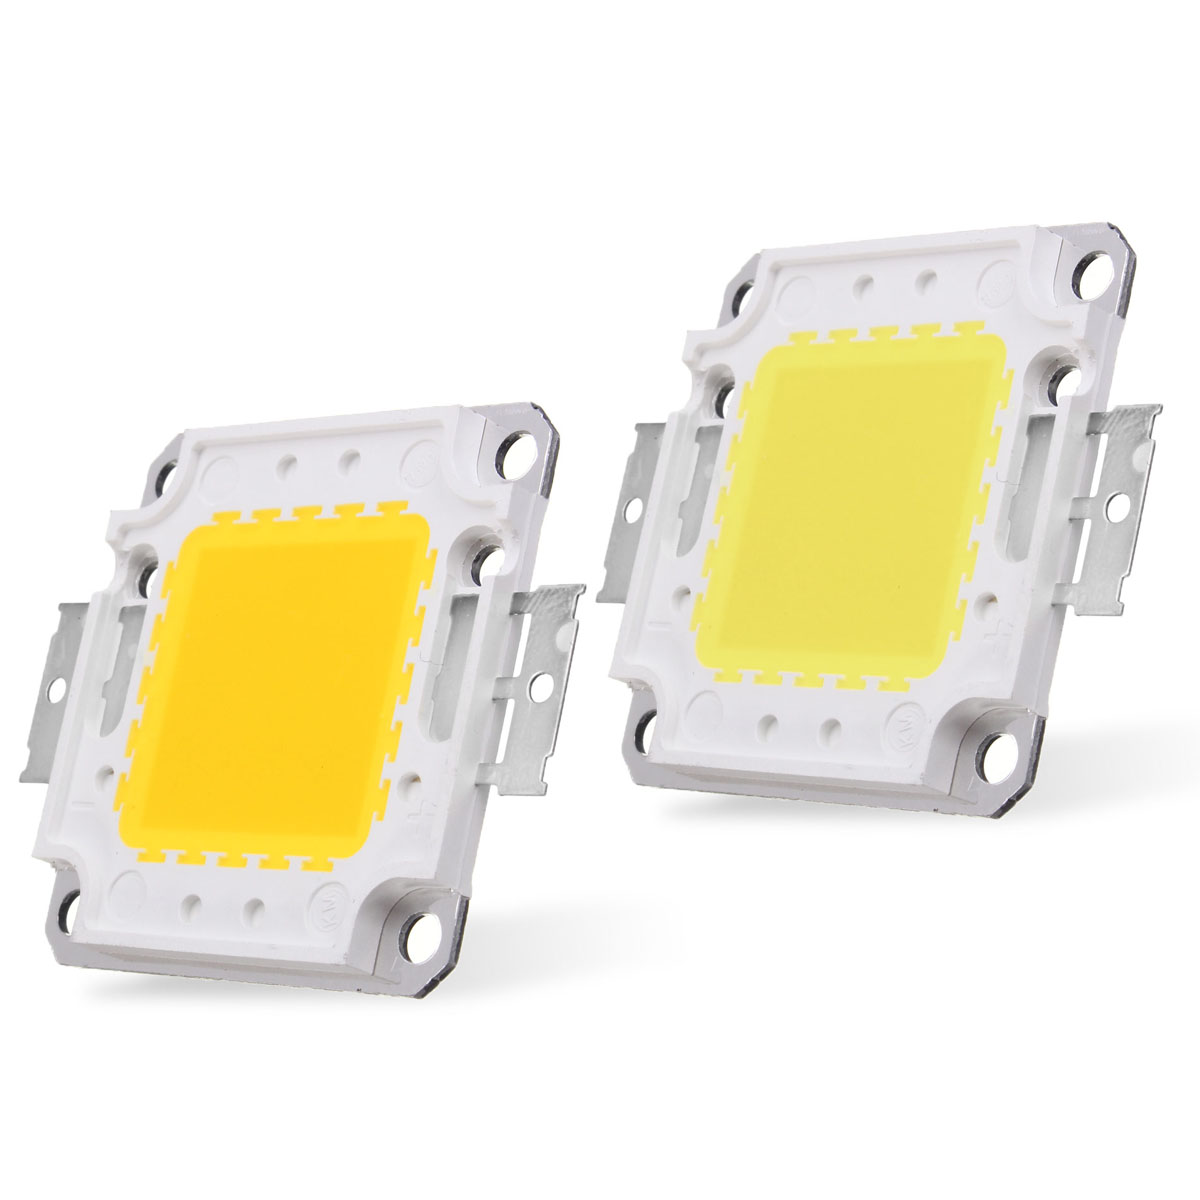 9W-Waterproof-High-Power-LED-Driver-Supply-SMD-Chip-for-Light-AC85-265V-1160499-3